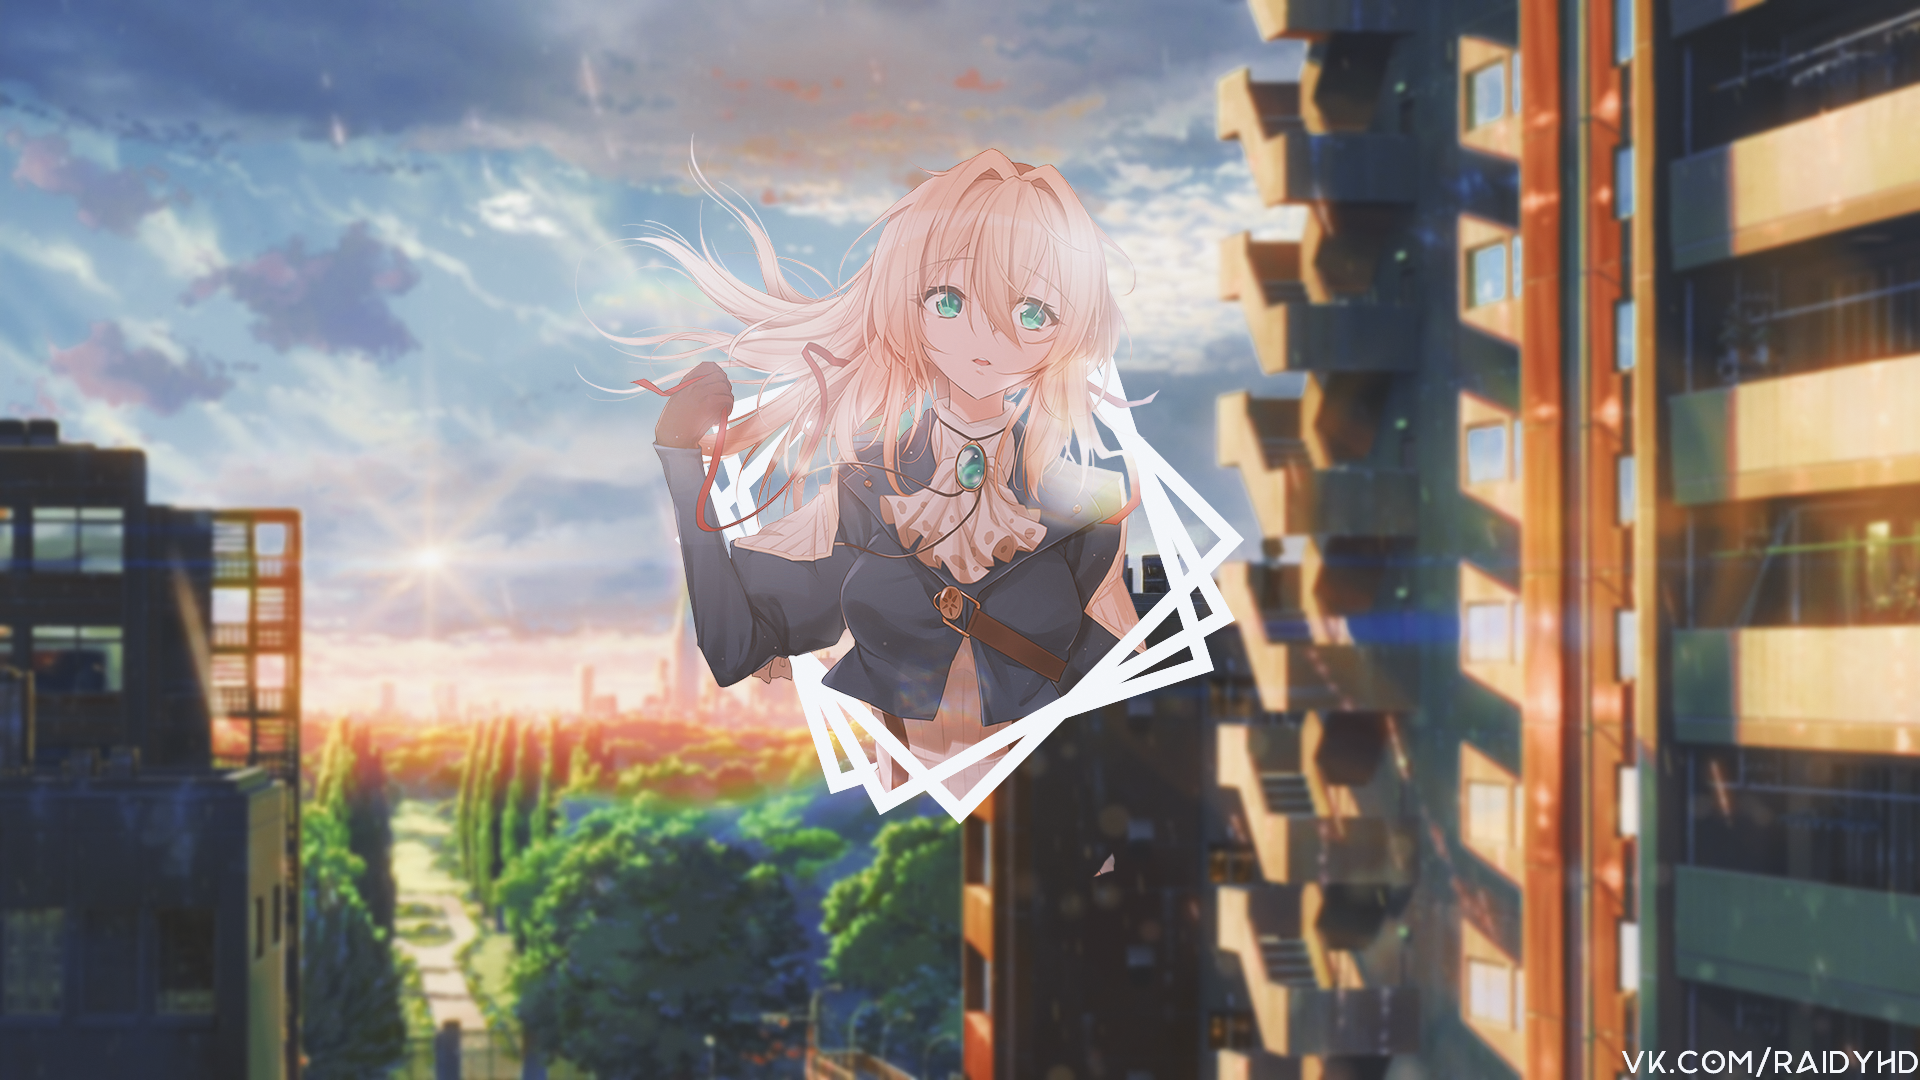 Anime 1920x1080 anime anime girls picture-in-picture Violet Evergarden